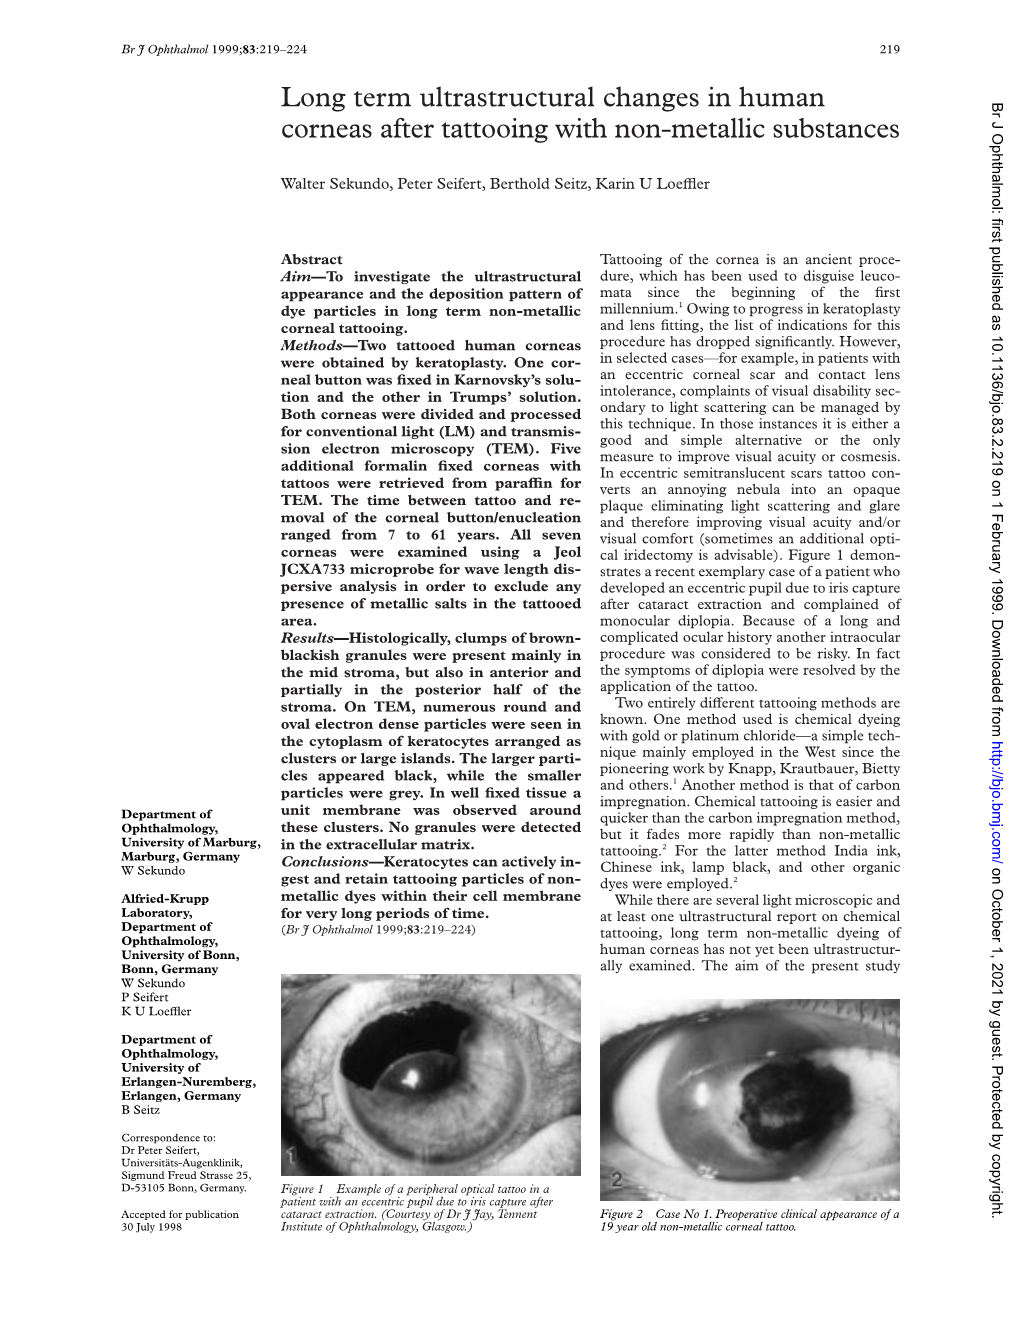 Long Term Ultrastructural Changes in Human Corneas After Tattooing with Non-Metallic Substances